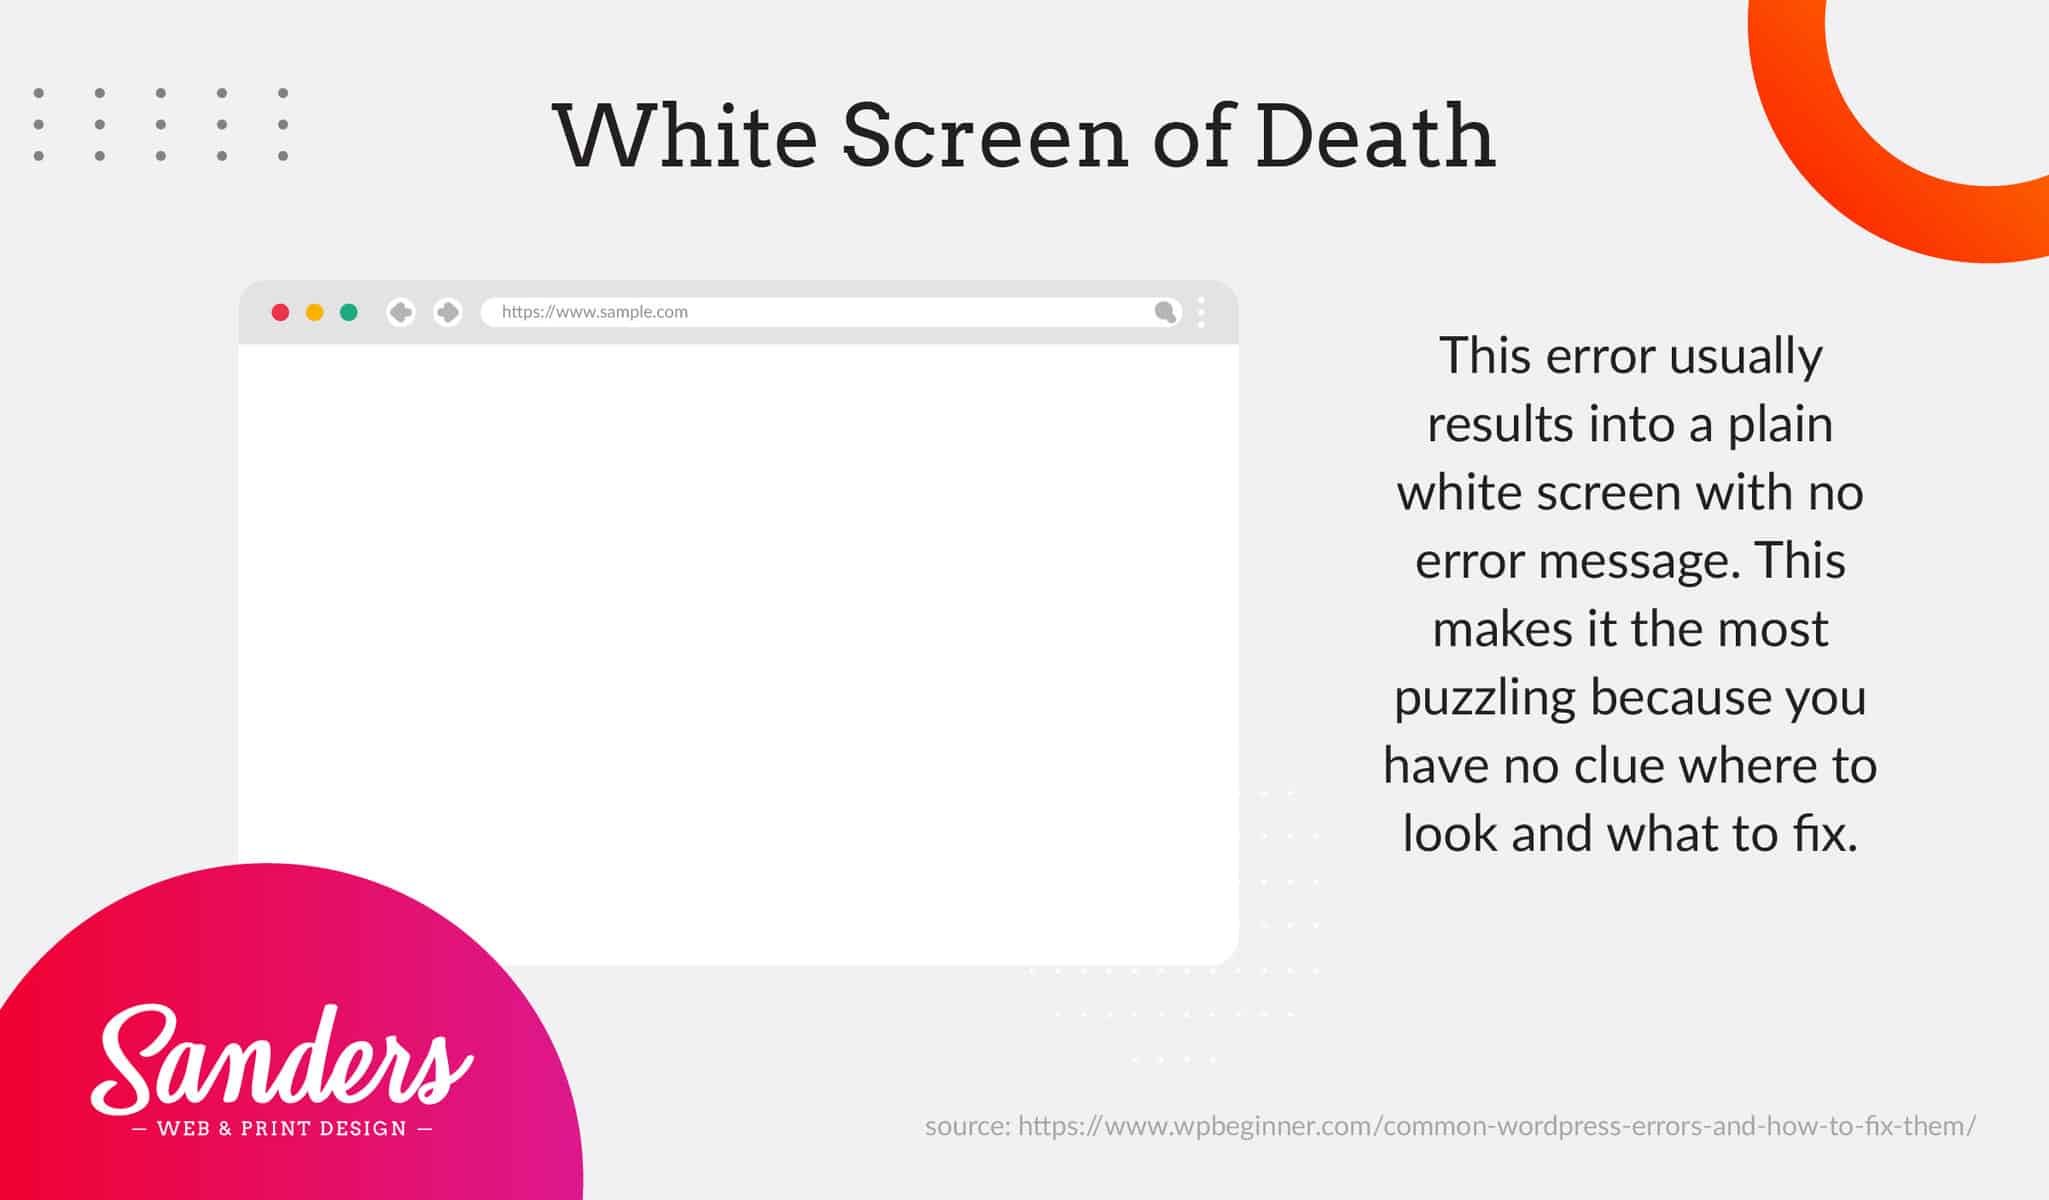 The White Screen of Death - Sanders Design